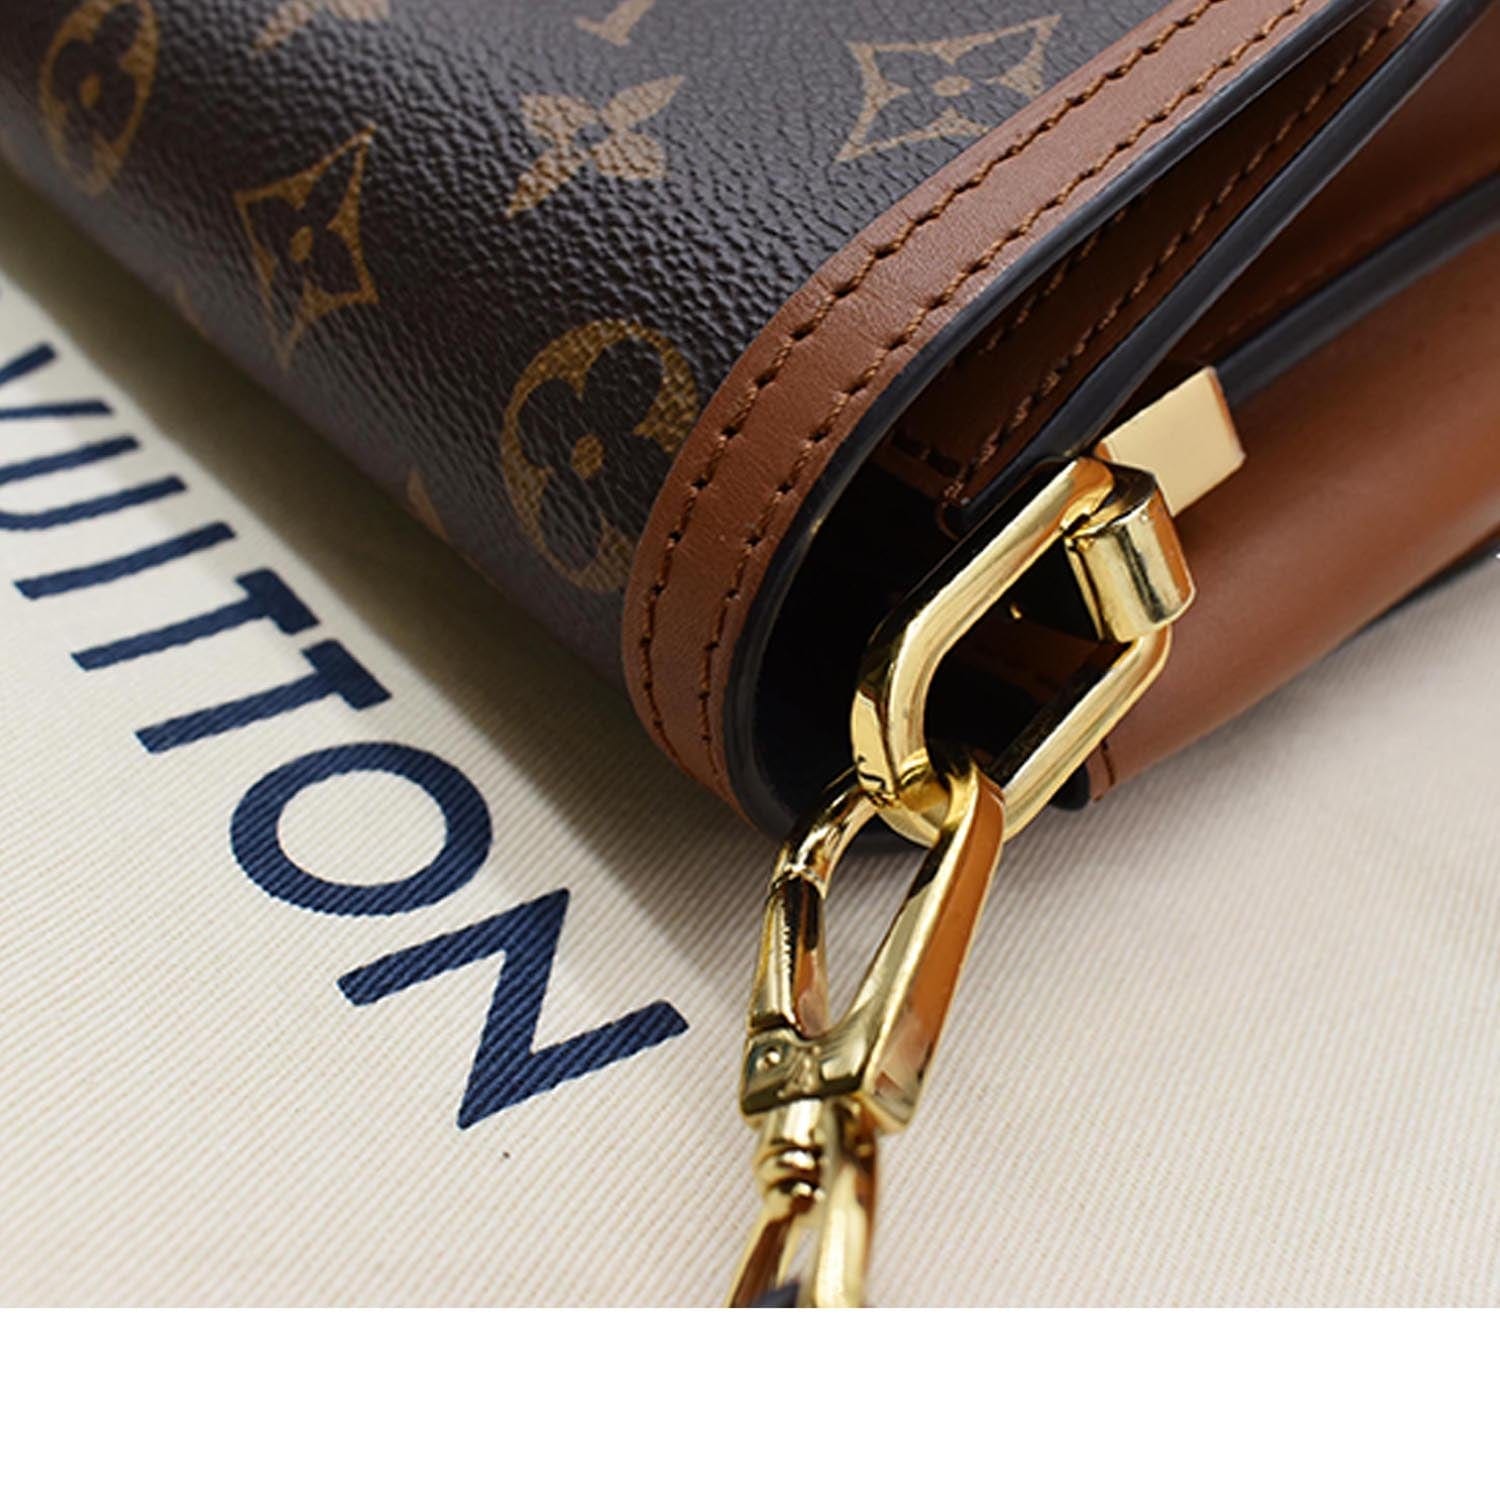 Products by Louis Vuitton: Dauphine Mini Bag